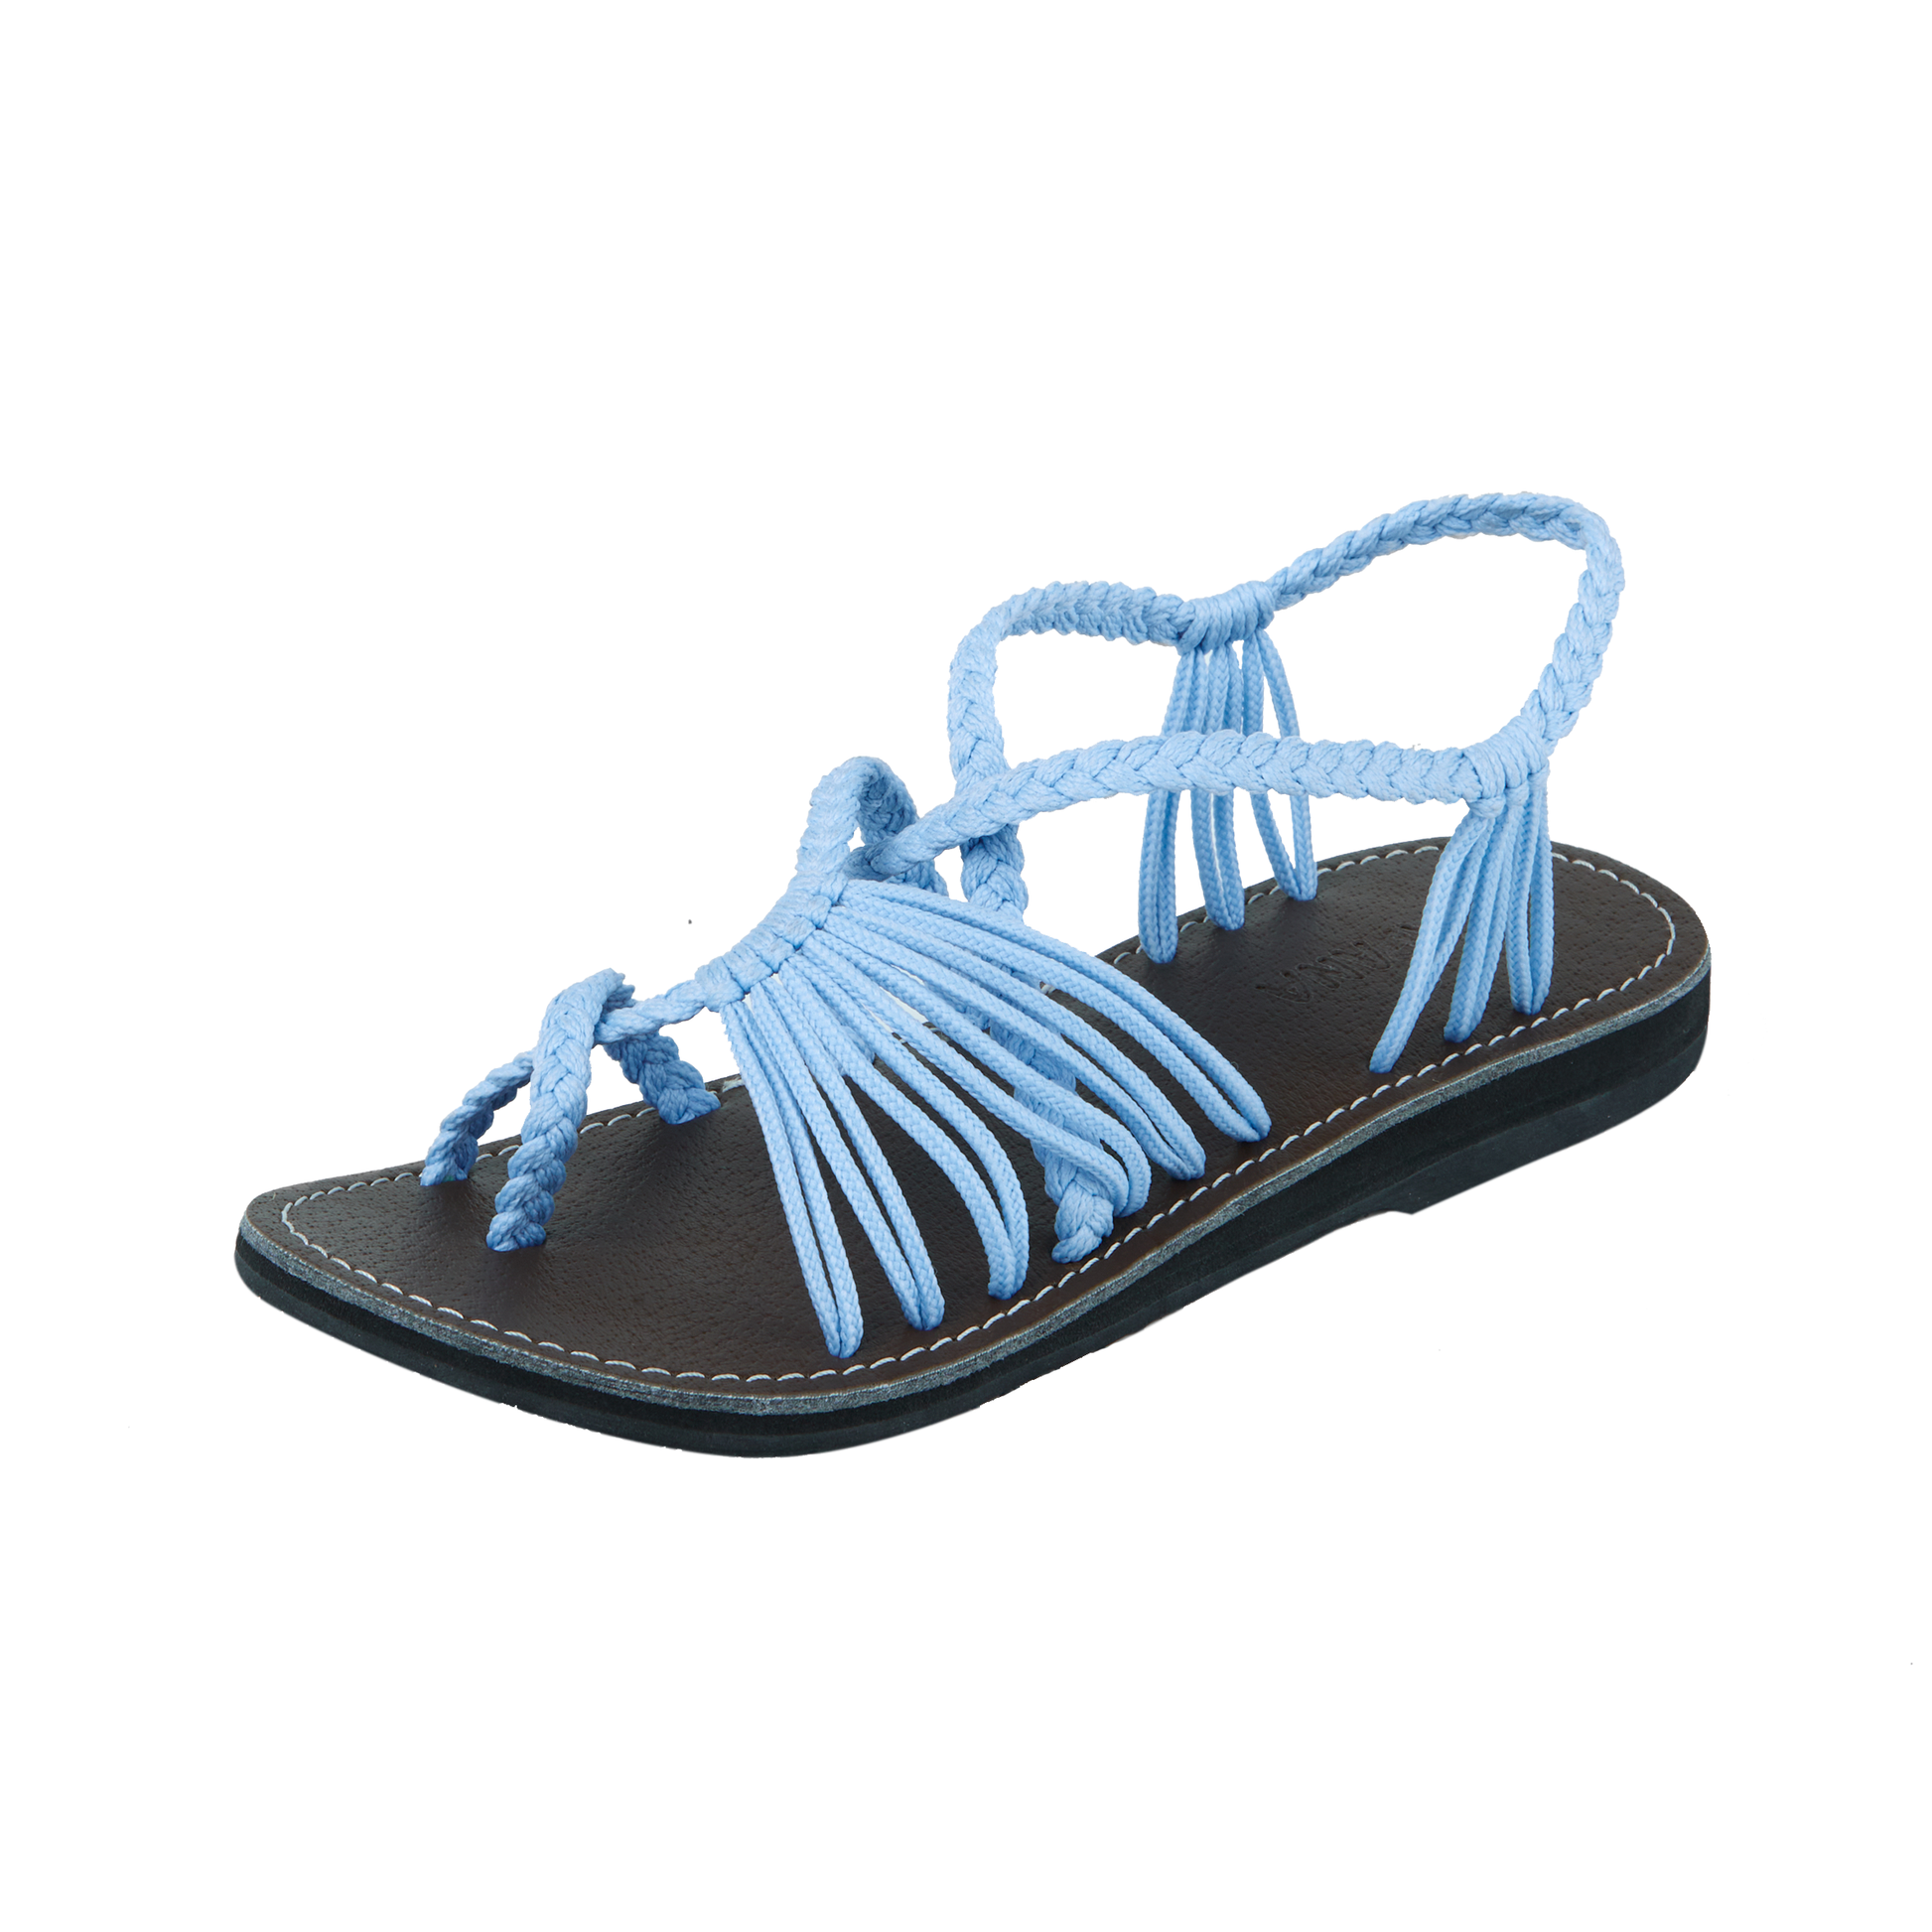 Hand woven sandals Maya Blue Rope Sandals on the side  in white background